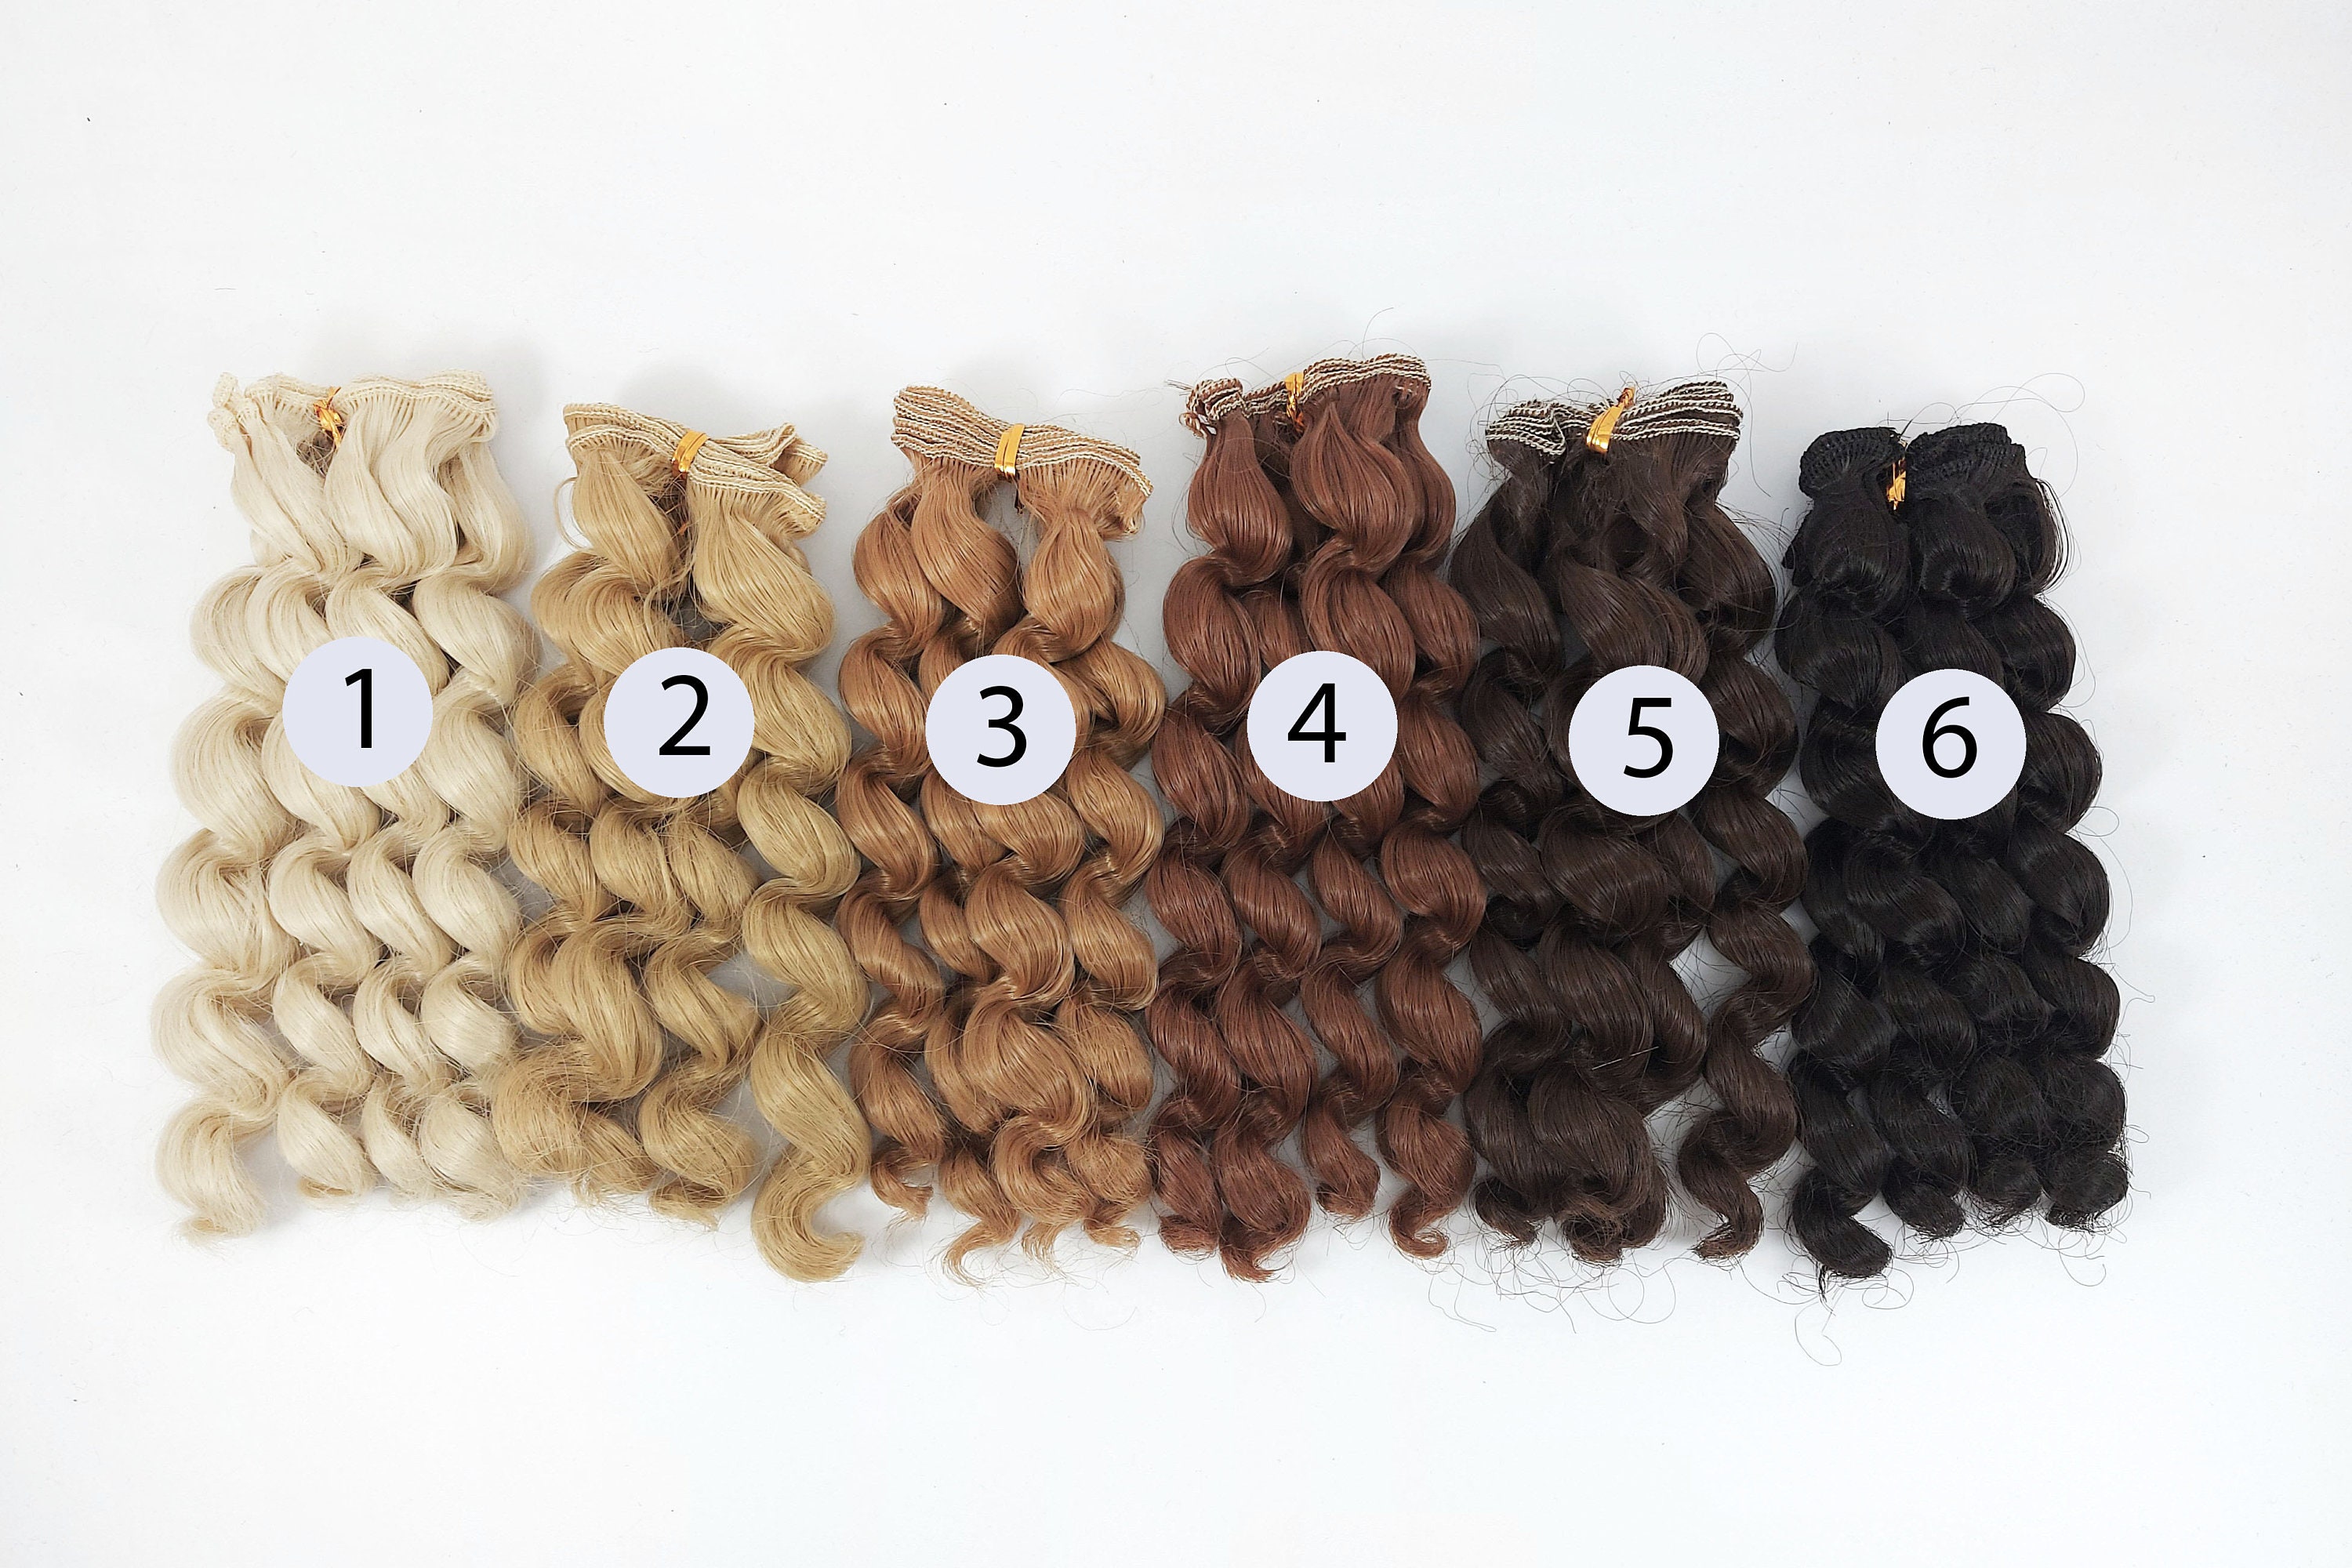 Ciieeo 5 Pcs Doll DIY Wig Straight Synthetic Doll Hair Wefts 15cm Imitation  Wool Roll Doll Hair Synthetic Hair Extensions for Rerooting Wig Making